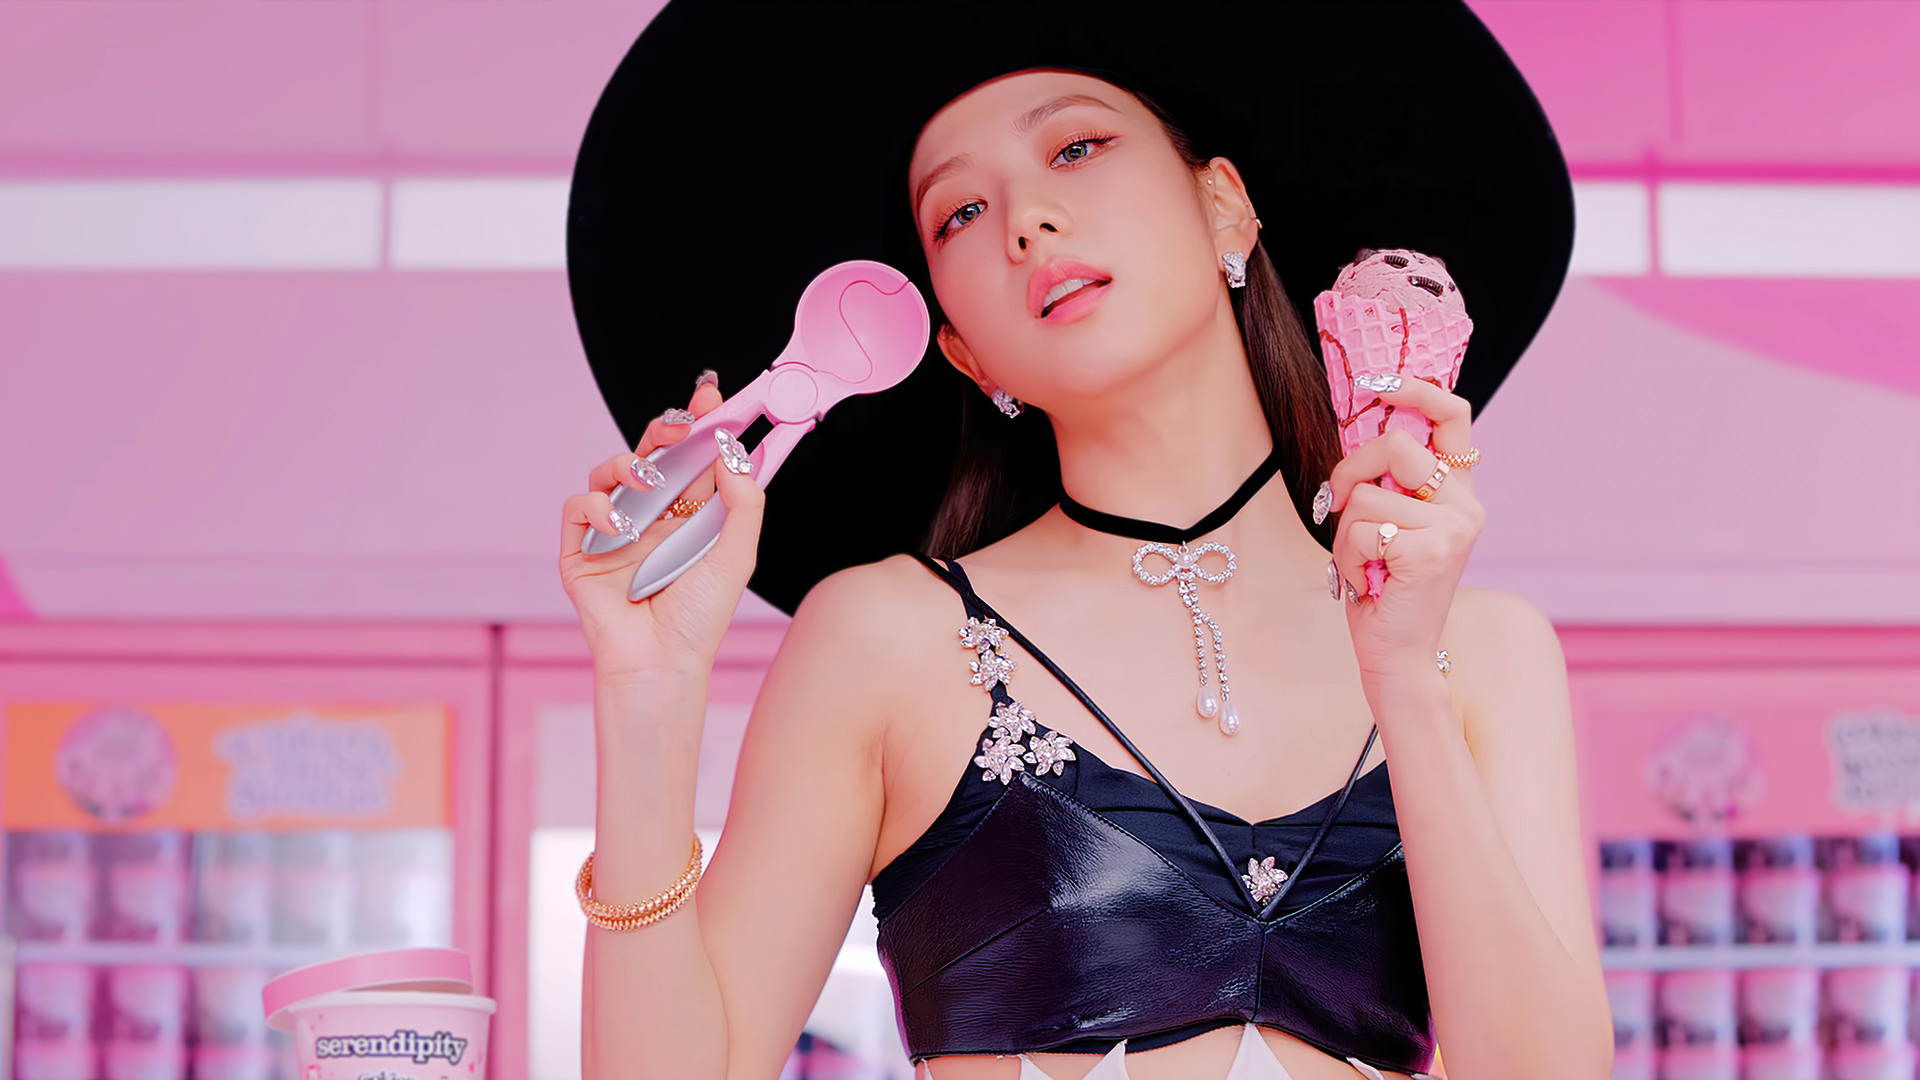 1920x1080 Jisoo Blackpink Ice Cream 1080p Laptop Full Hd Wallpaper Hd Celebrities 4k Wallpapers Images Photos And Background